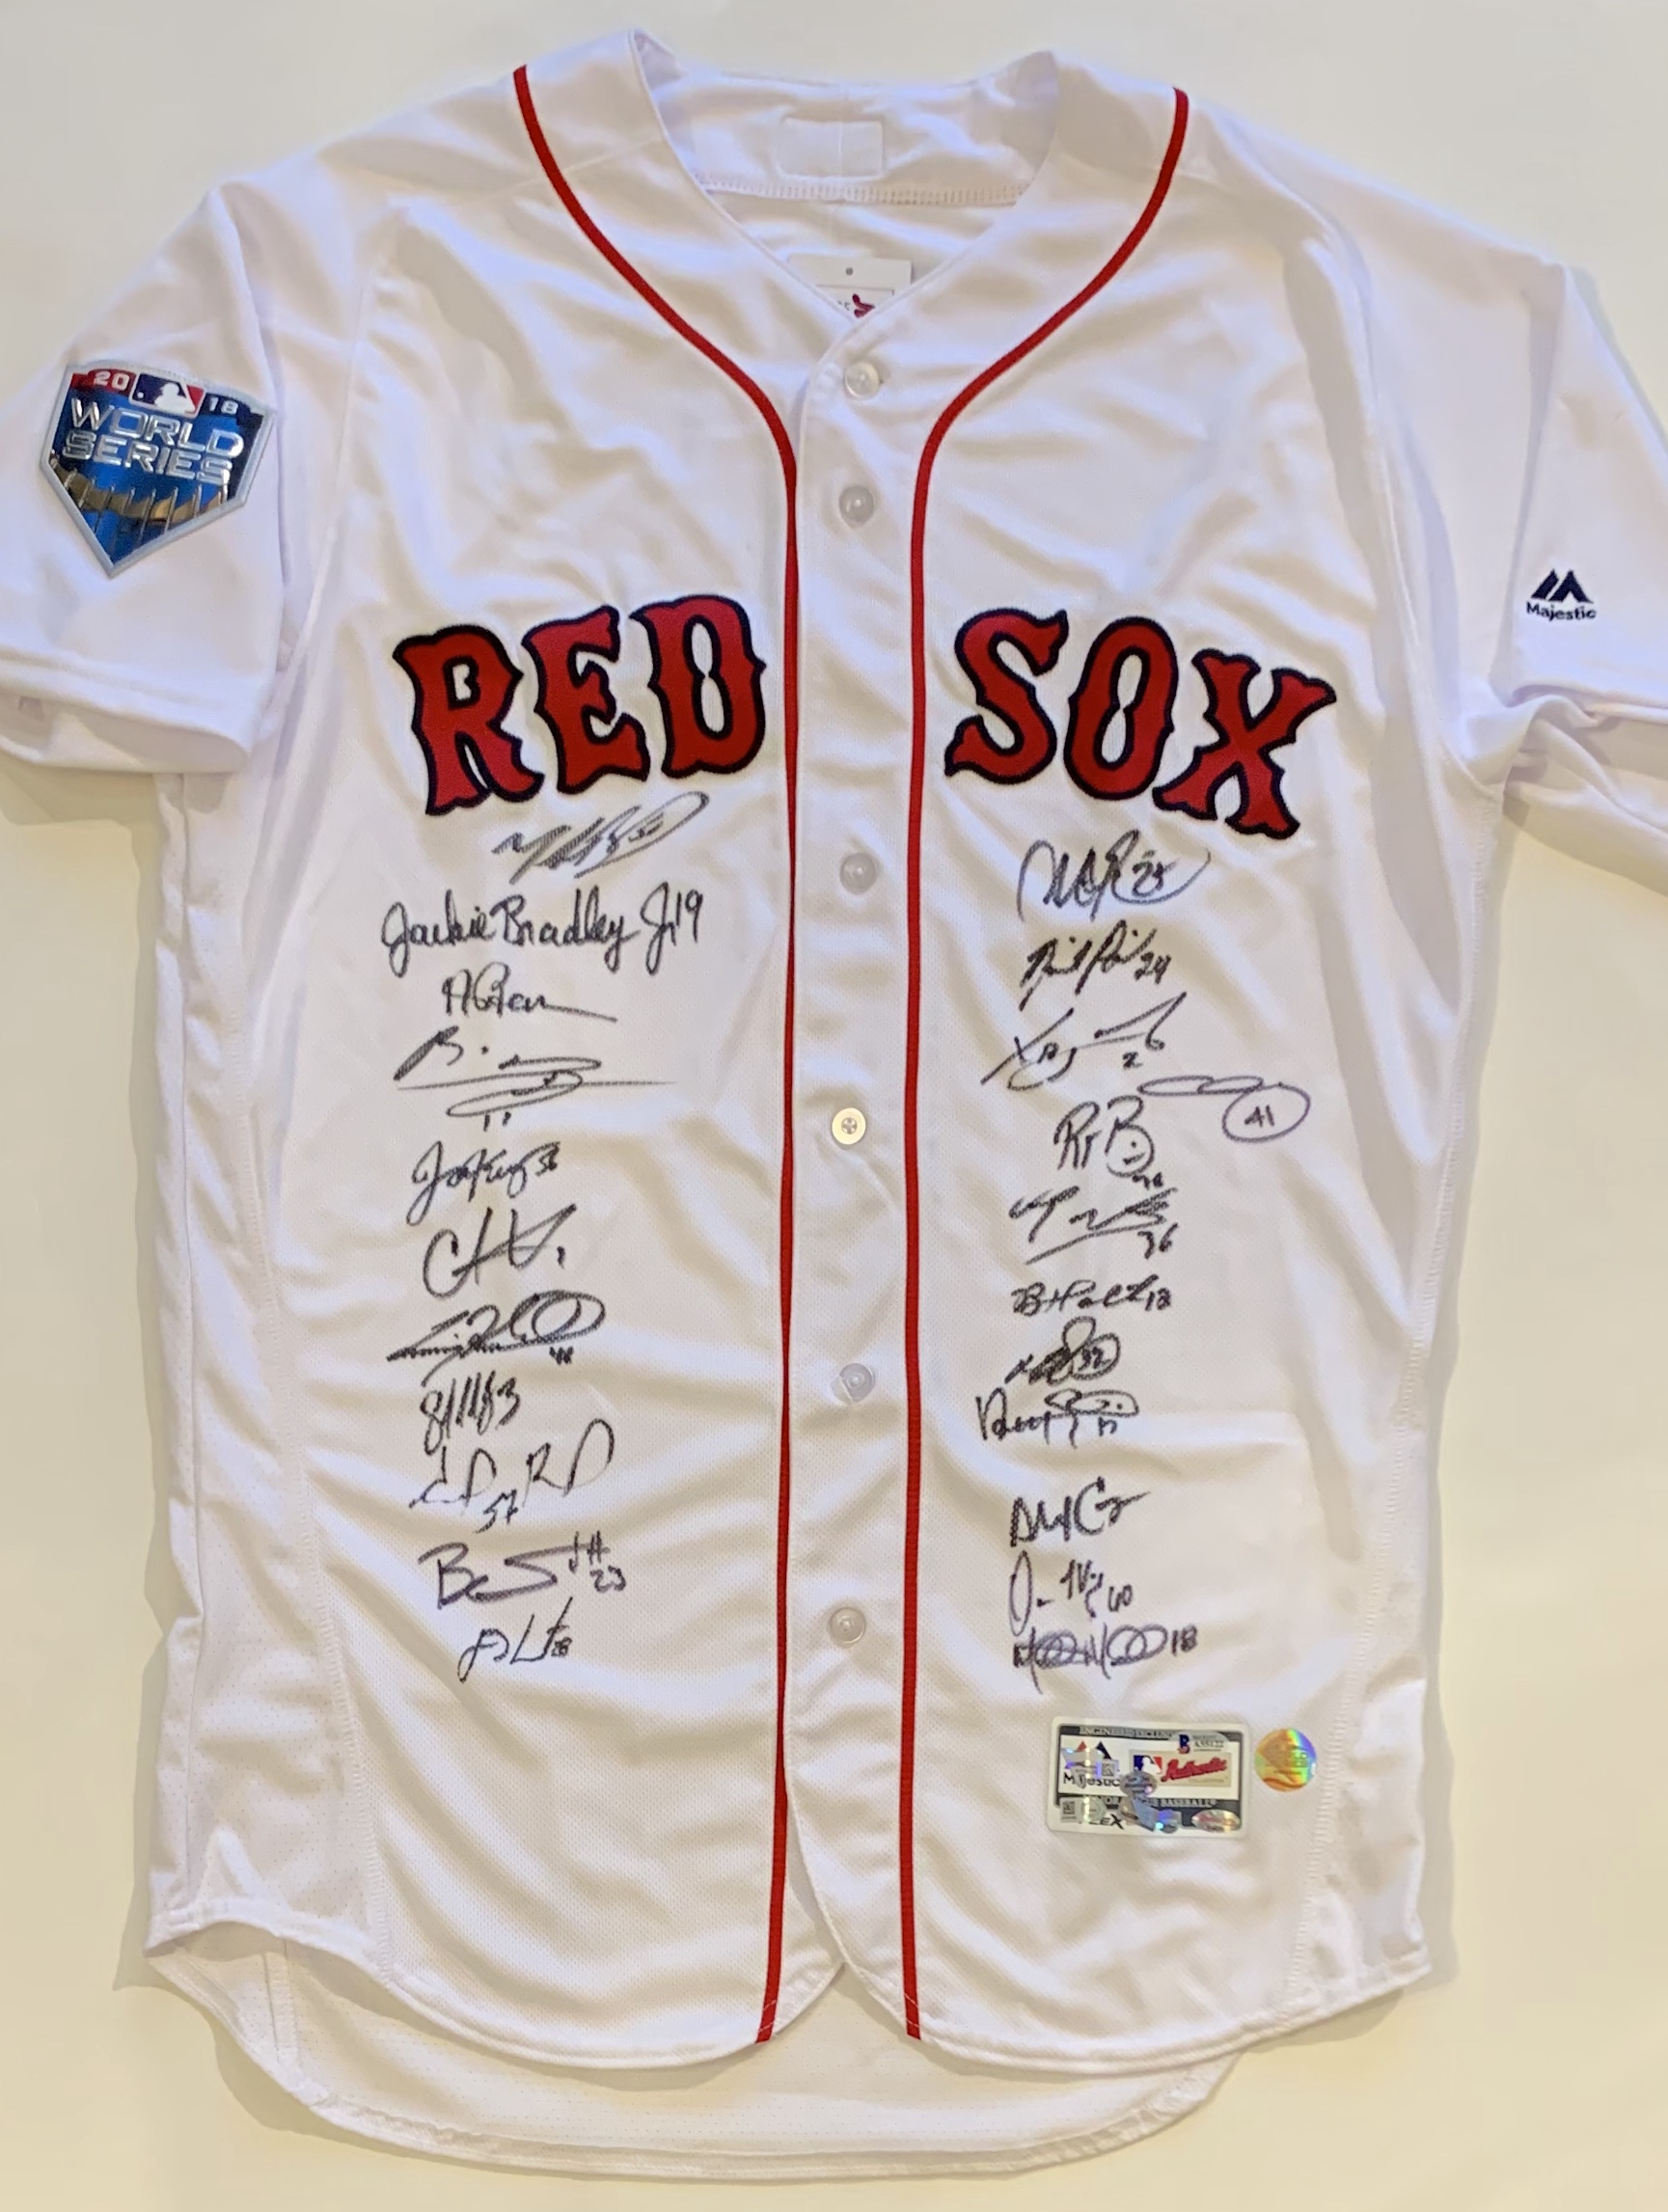 Boston Red Sox 2018 World Series Team Autographed Jersey - signed by 20